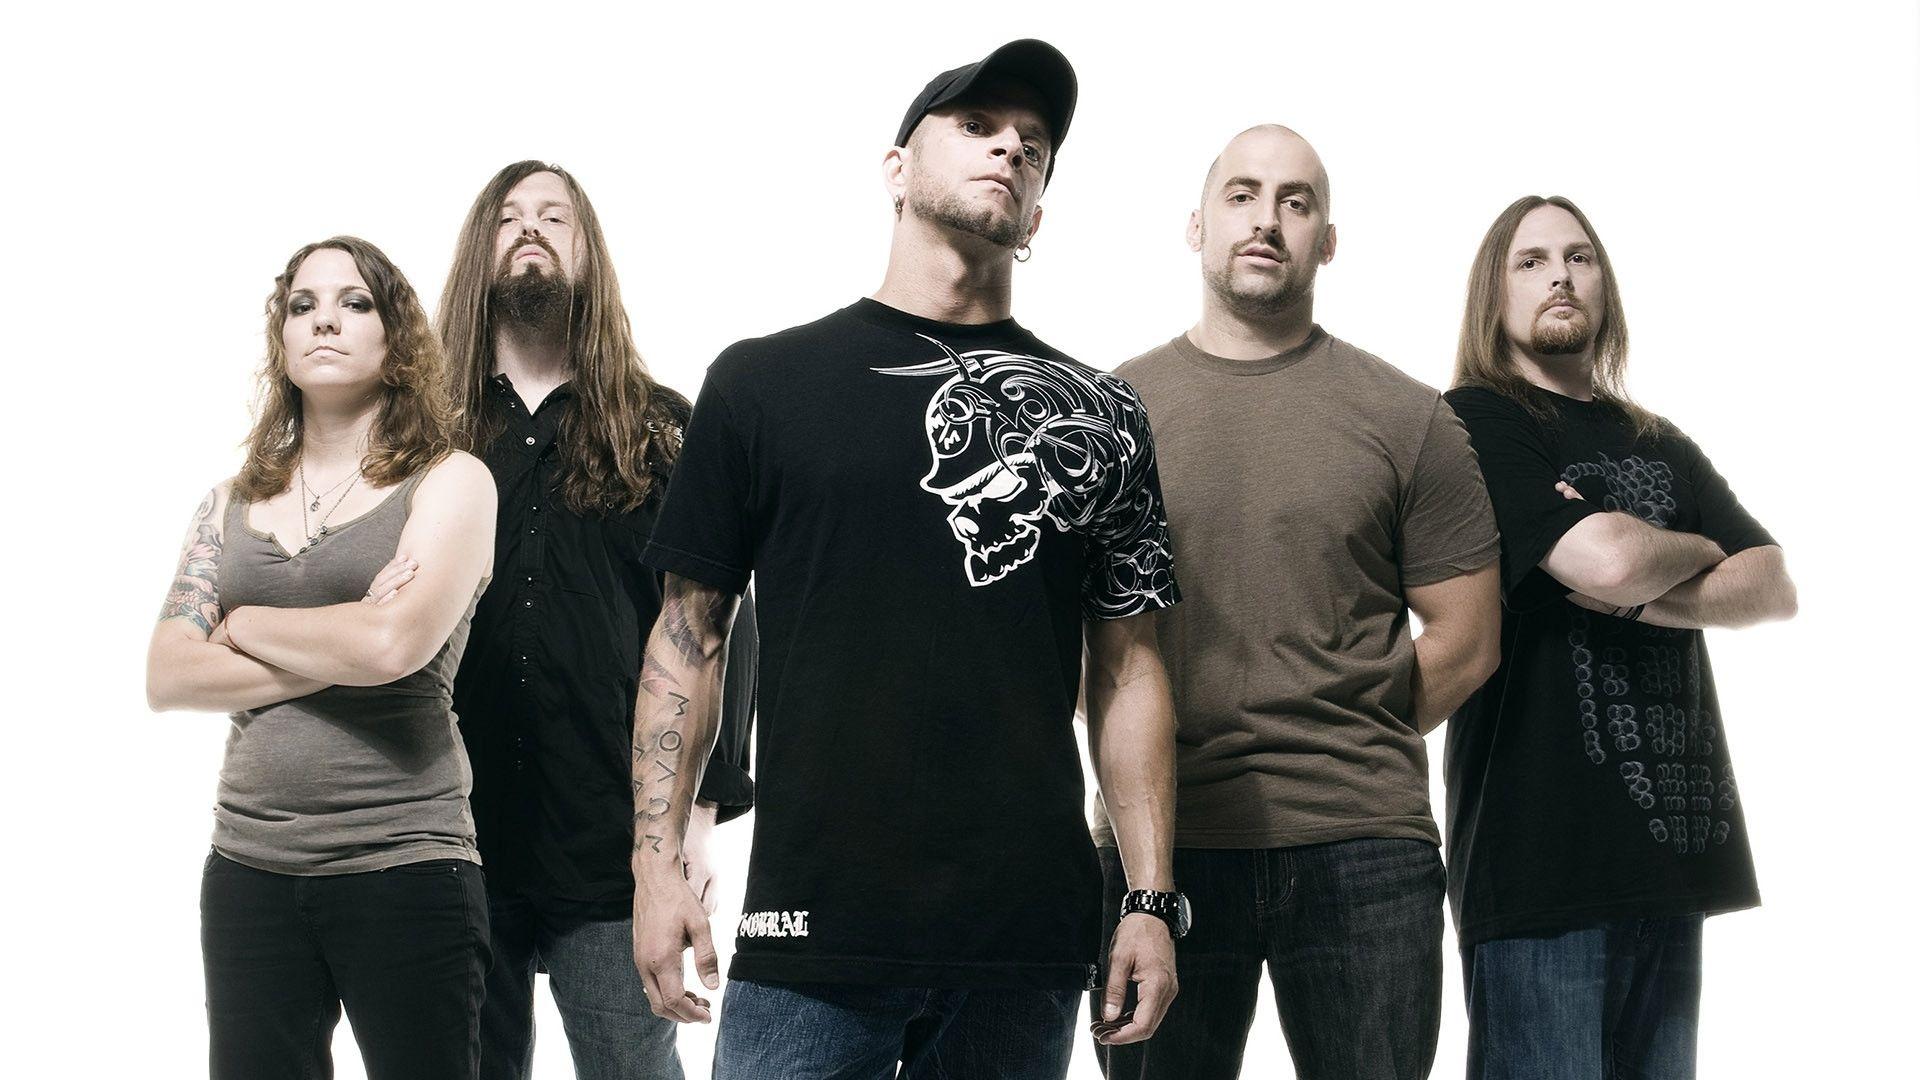 Music All That Remains Wallpaper 1920x1080 px Free Download